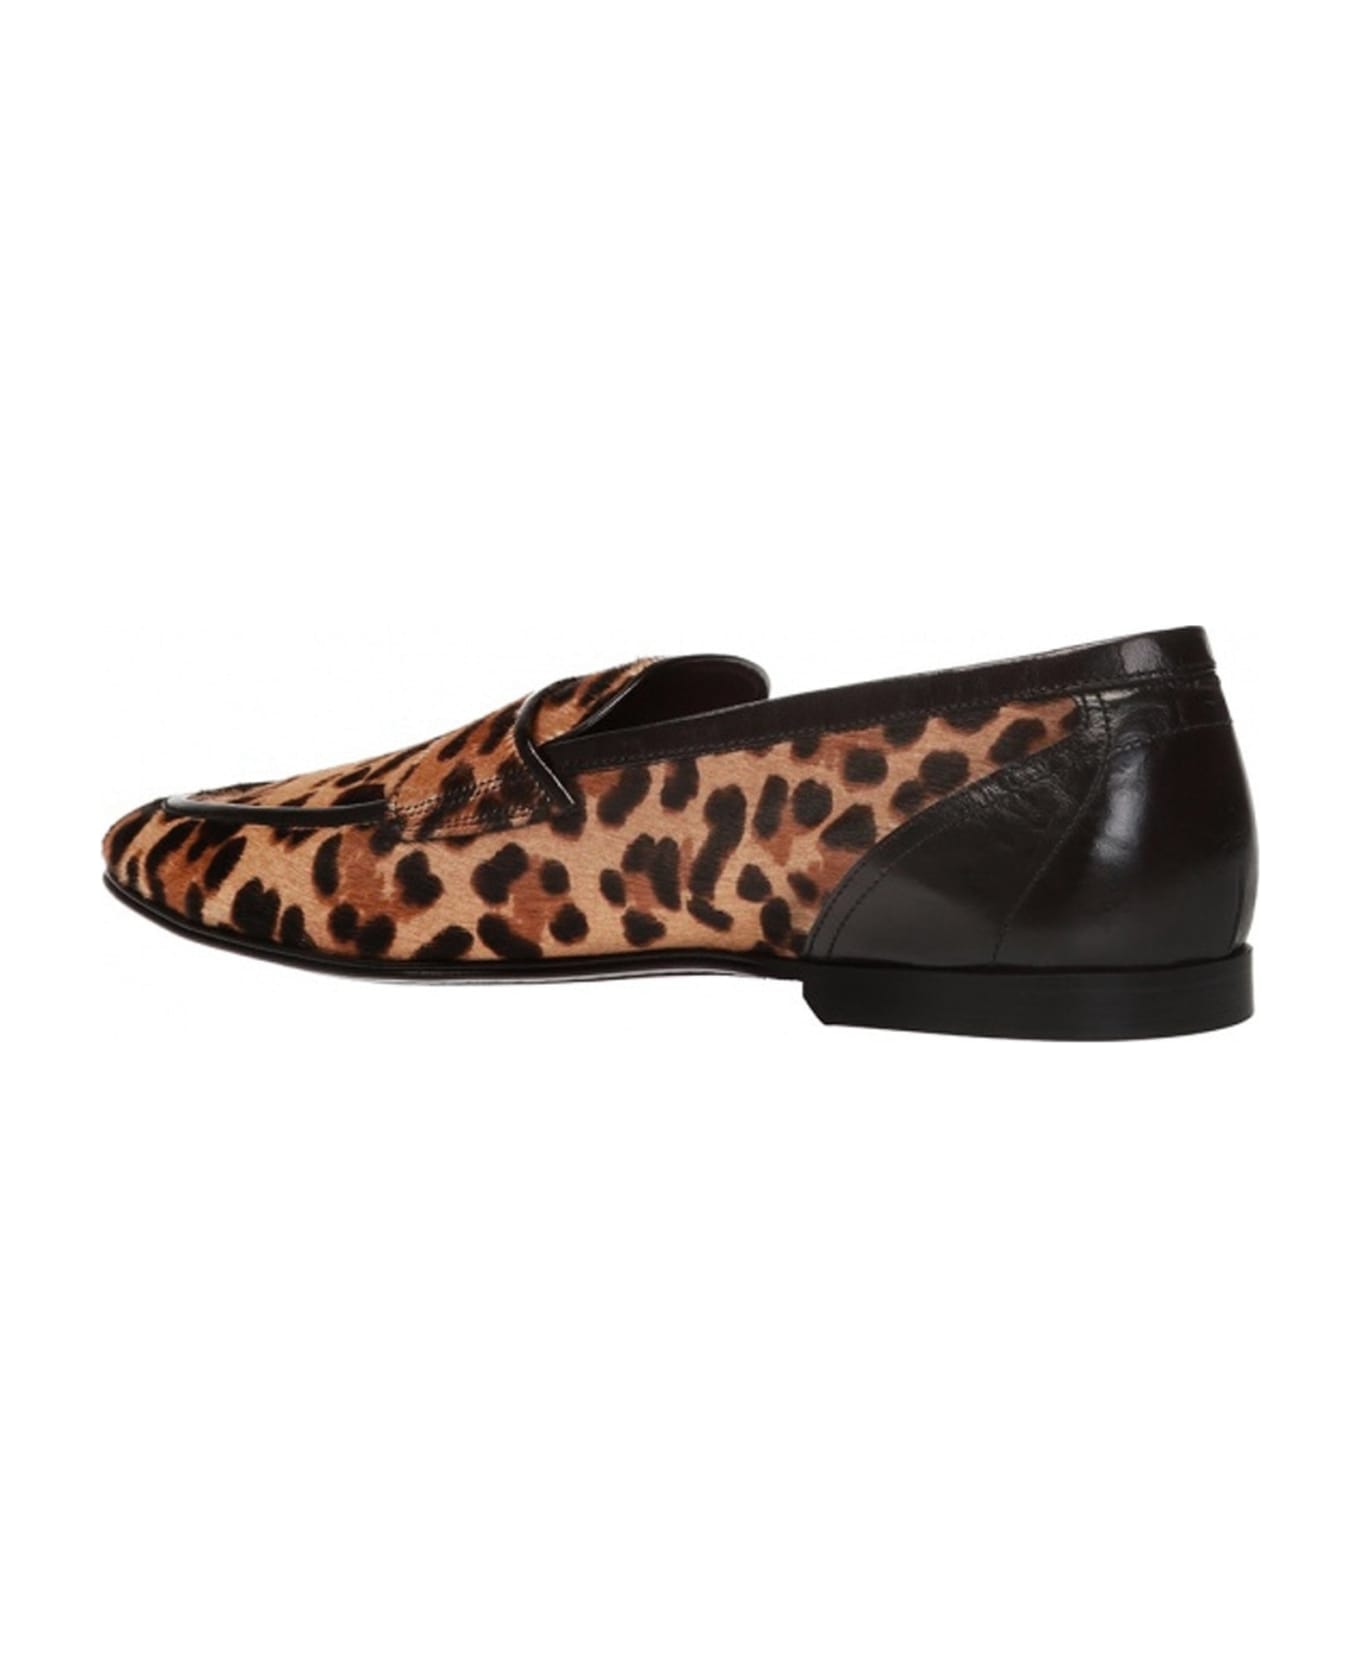 Dolce & Gabbana Leopard Print Pony Hair Loafers - Brown